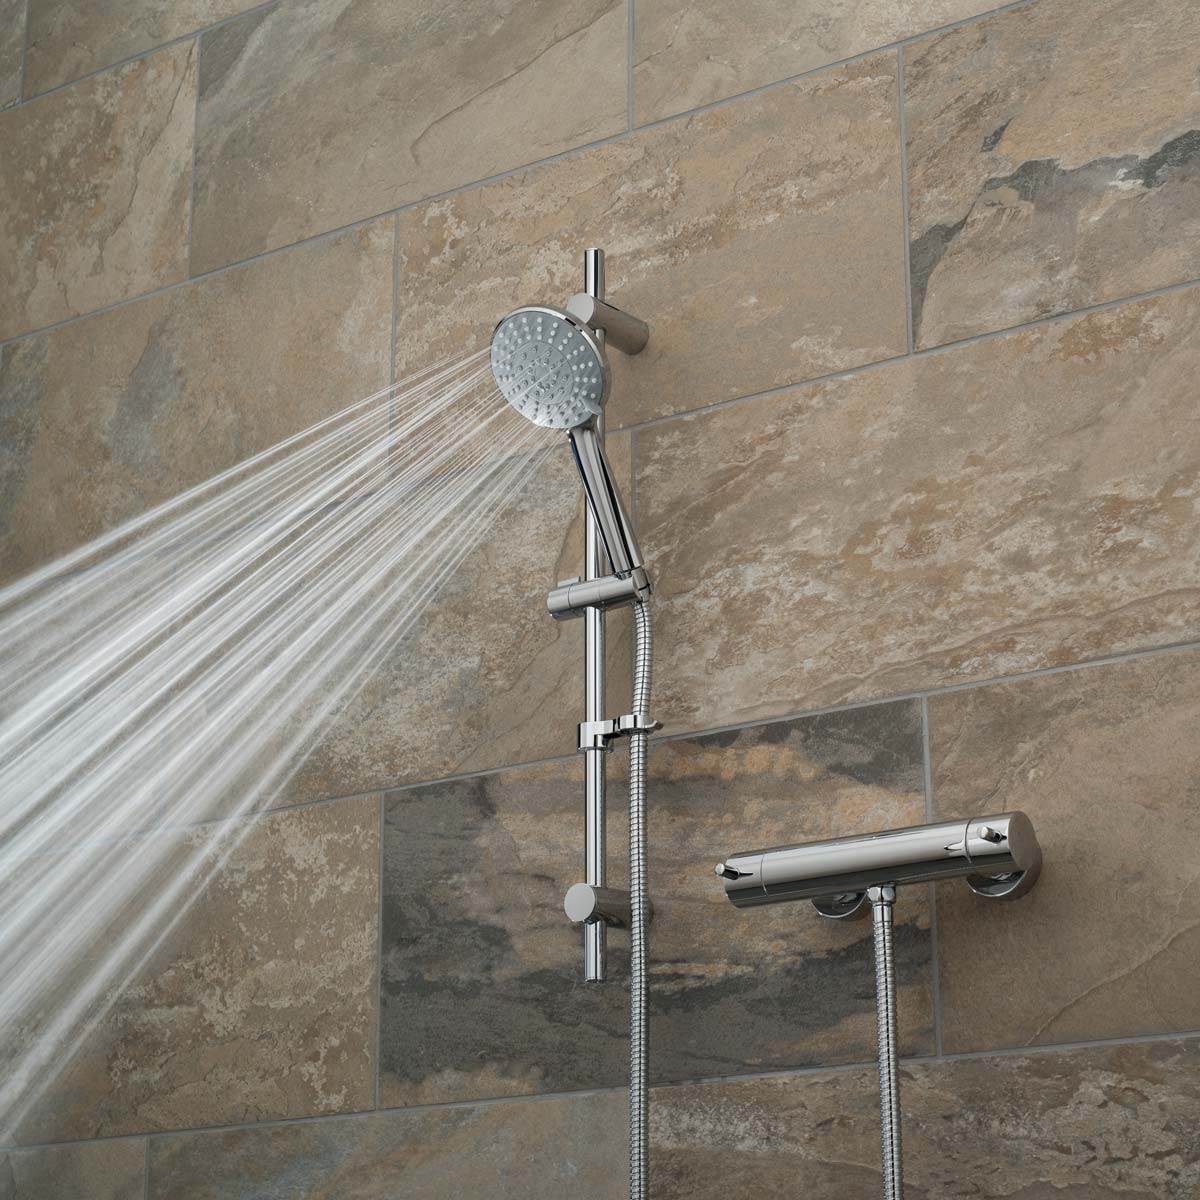 A slide rail shower kit with an exposed thermostatic bar type valve on a brown tiled wall with a wide spray pattern